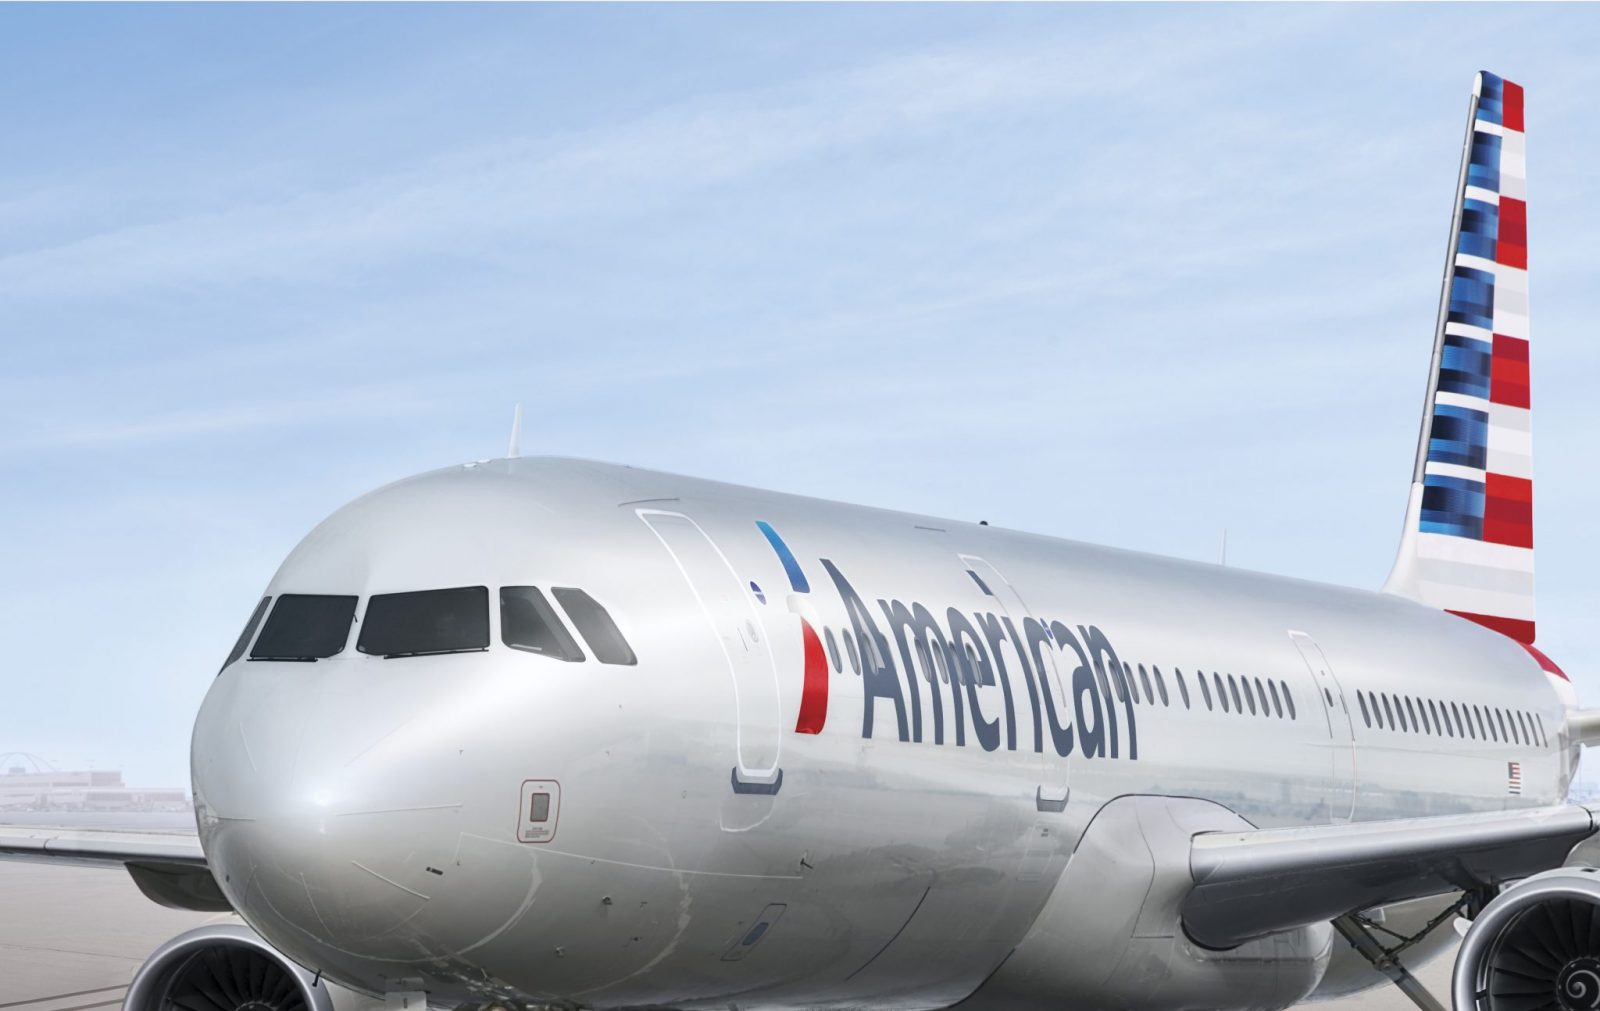 American Airlines Has a Critical Shortage of Flight Attendants: Invoking Special Work Rules